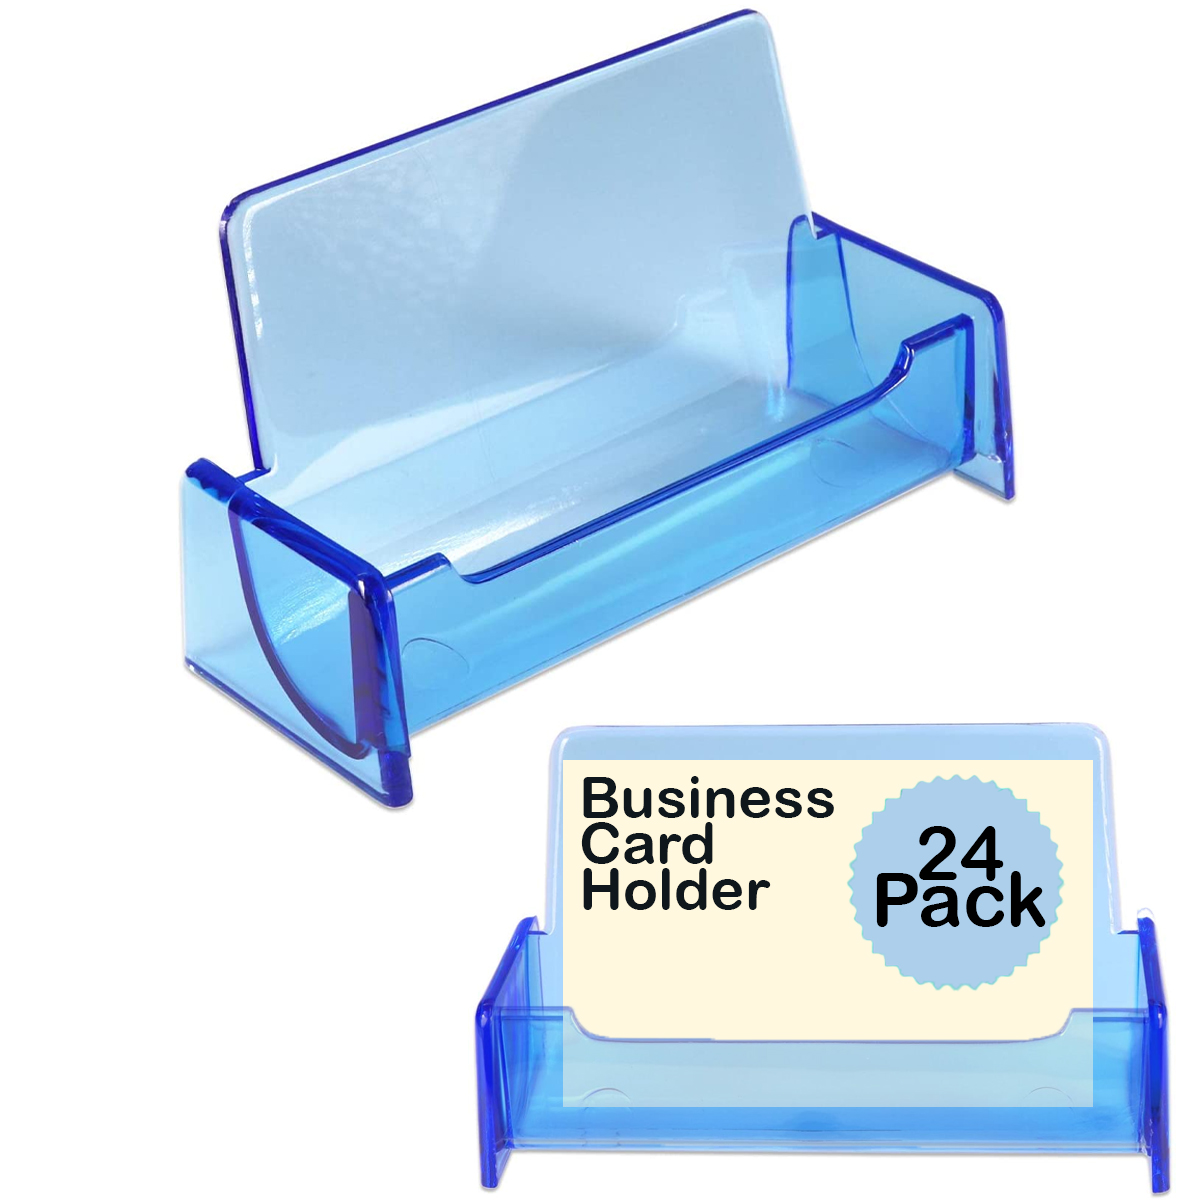 OfficeMate Business Card Holder Display Stand for Office Desk School Home,  24 Pack, Blue Plastic